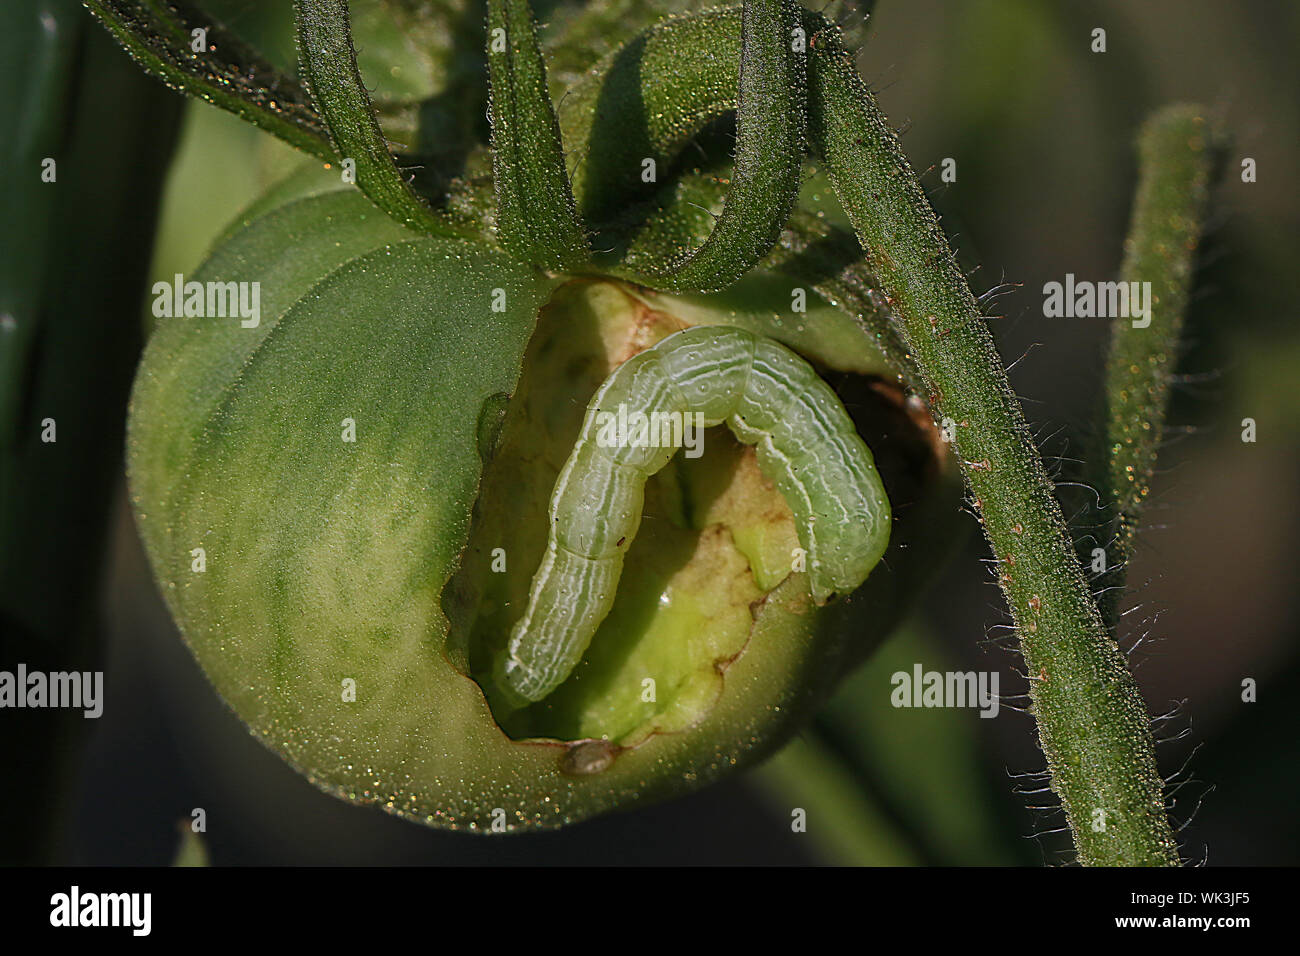 tomato horn worm larva of the five spotted hawk moth Latin Manduca quinquemaculata excavating a green tomato in summer in Italy Stock Photo